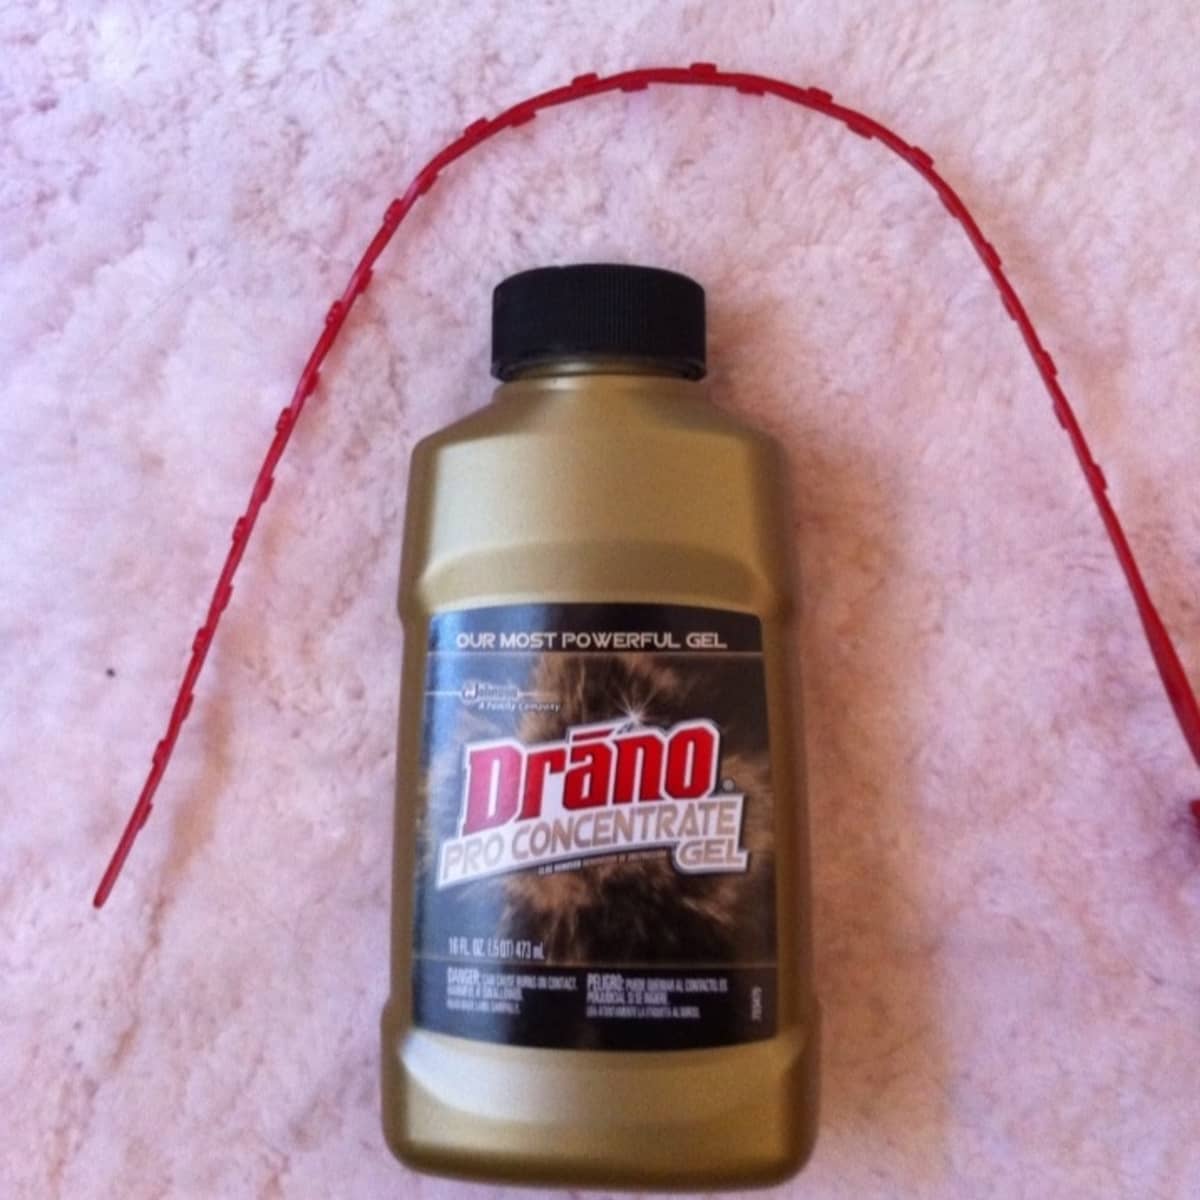 How To Unclog A Shower Drain With, Is Drano Safe For Bathtubs